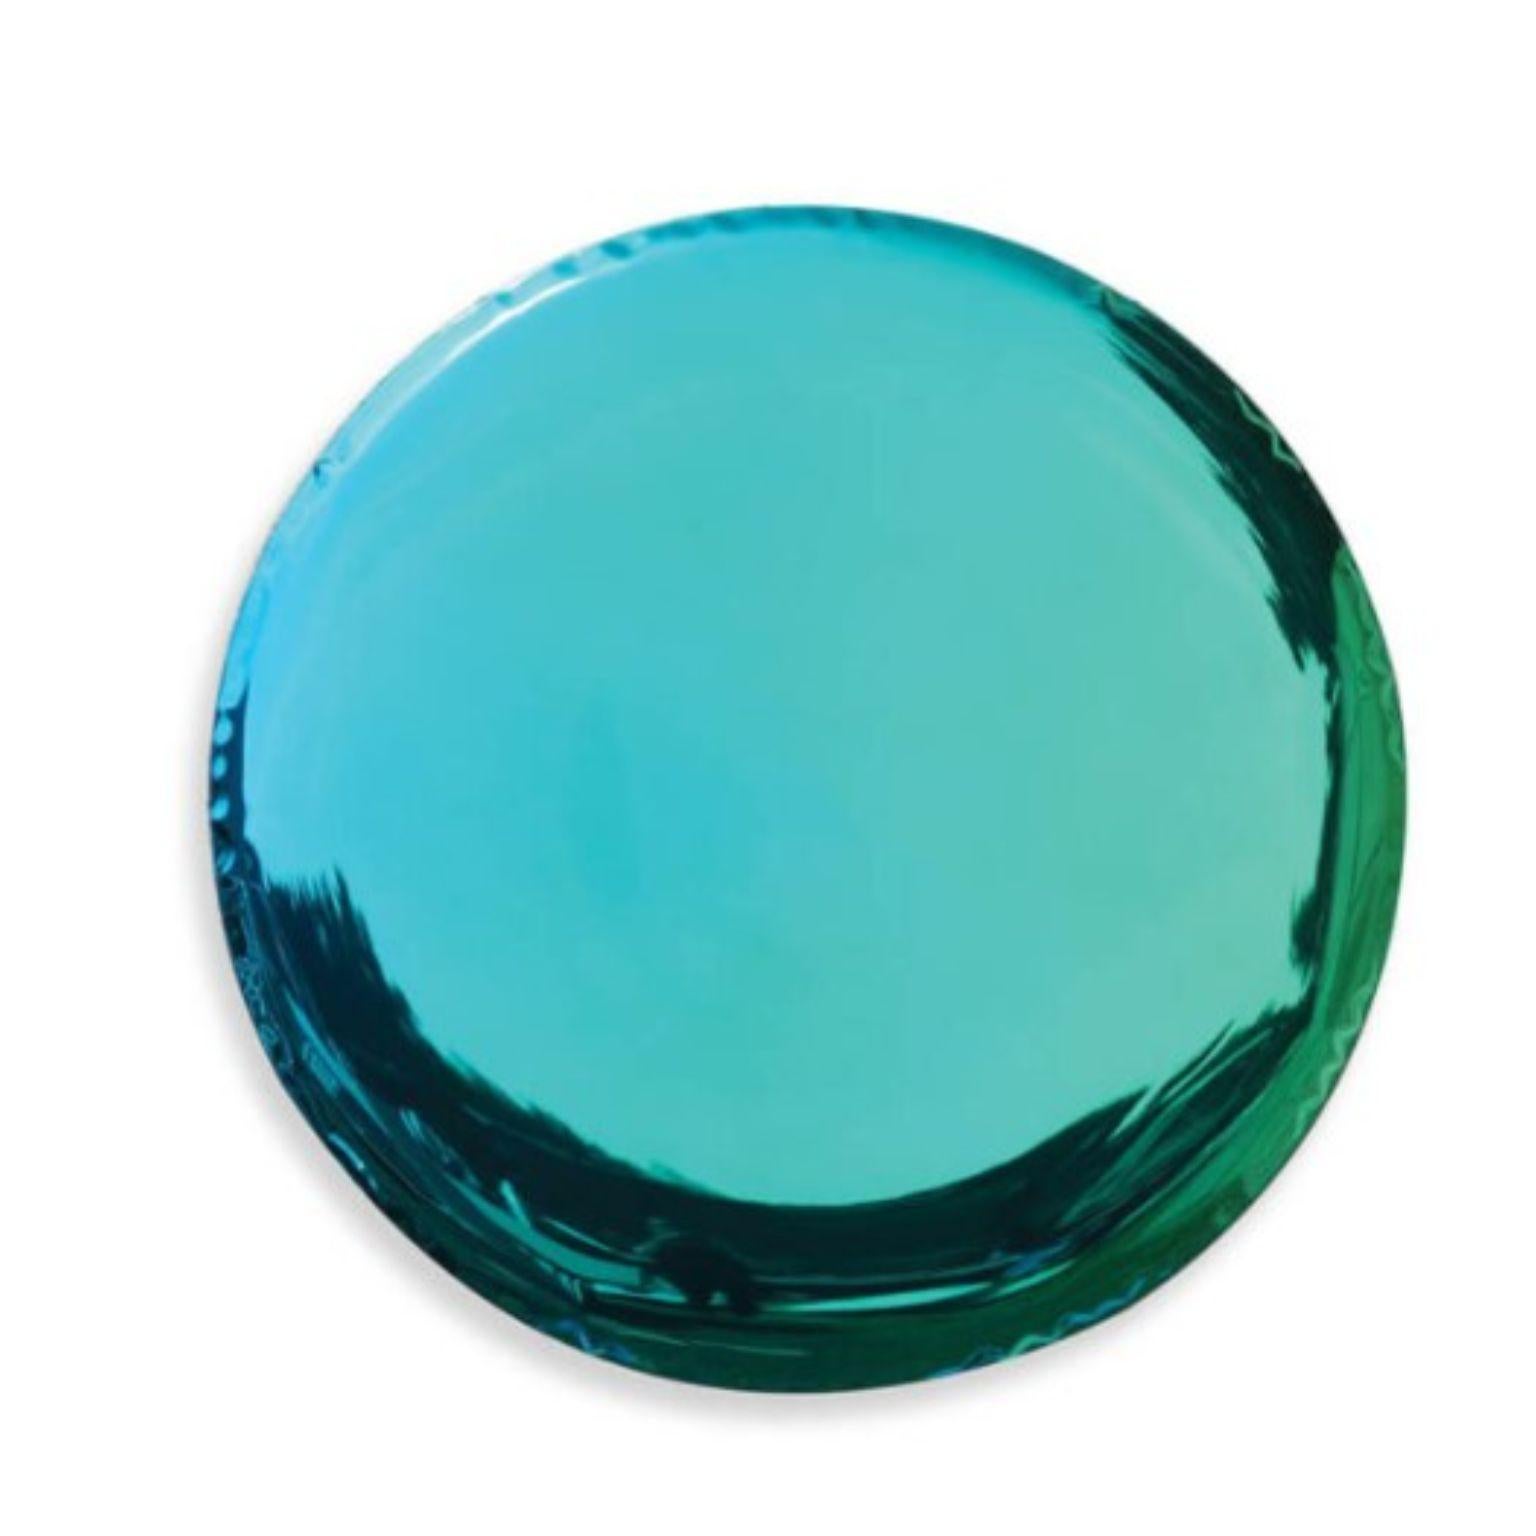 Emerald Sapphire Oko 95 sculptural wall mirror by Zieta
Dimensions: Diameter 95 x D 6 cm 
Material: Stainless steel. 
Finish: Emerald/Sapphire.
Available in finishes: Stainless Steel, Deep Space Blue, Emerald, Saphire, Saphire/Emerald, Dark Matter,